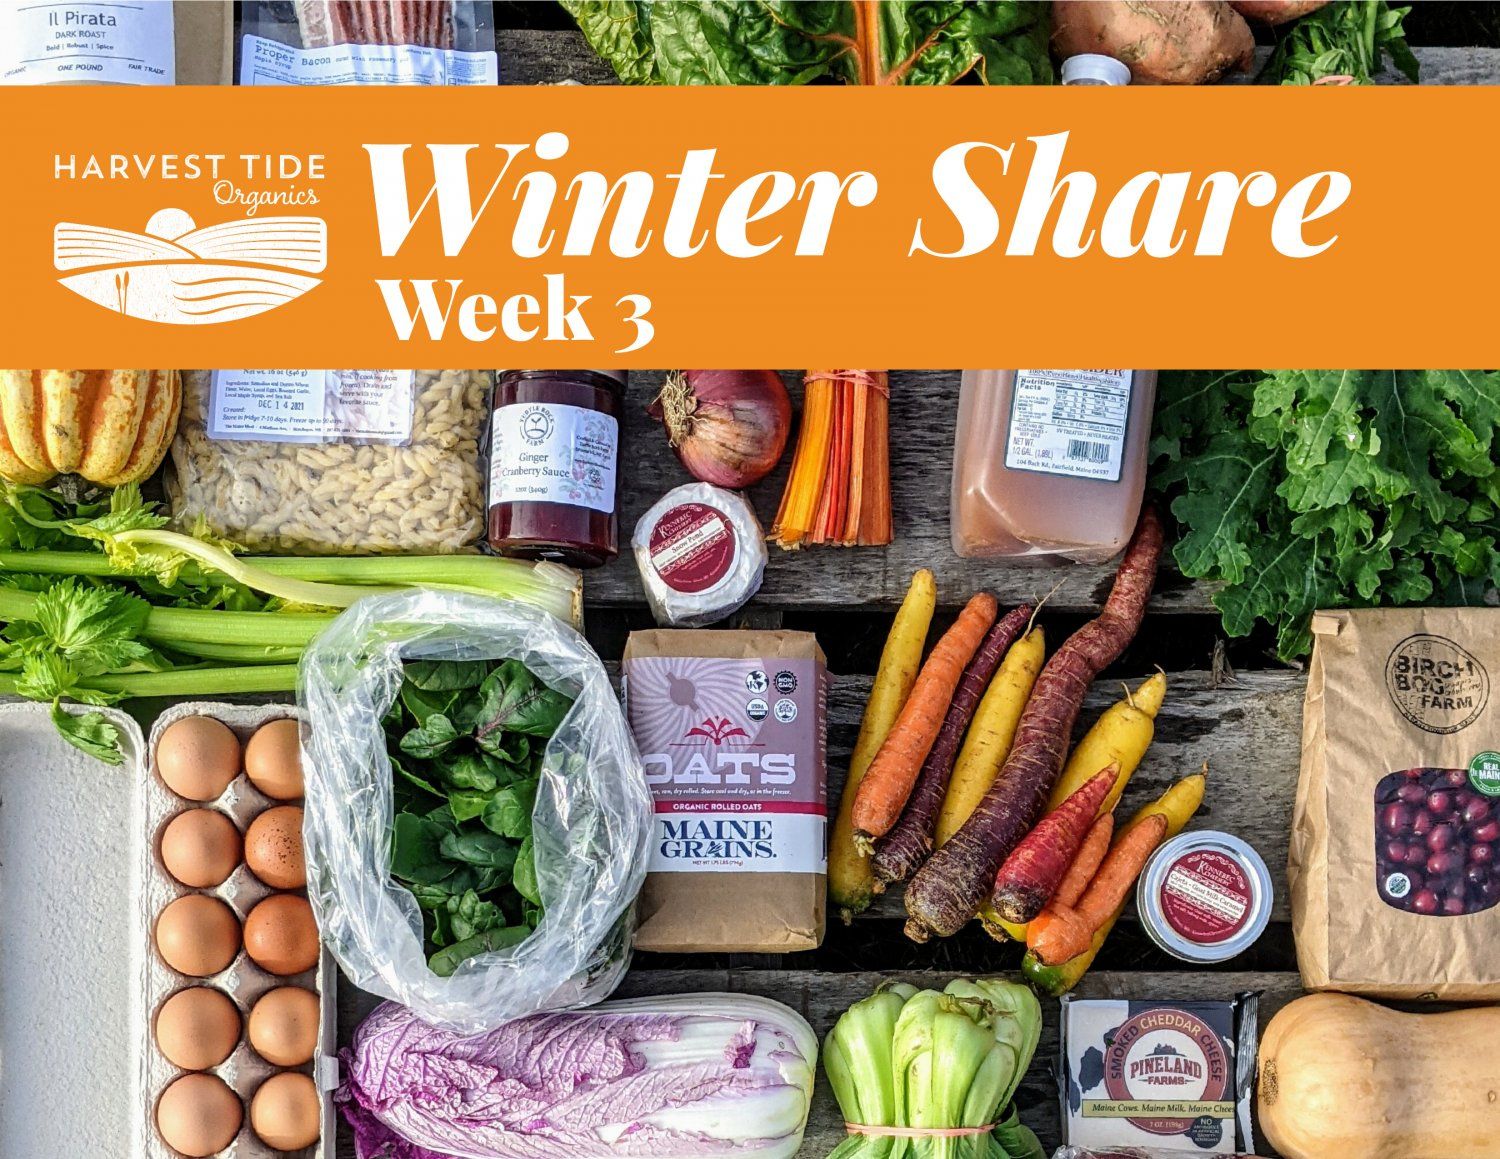 Previous Happening: Winter Harvest Share - Week 3